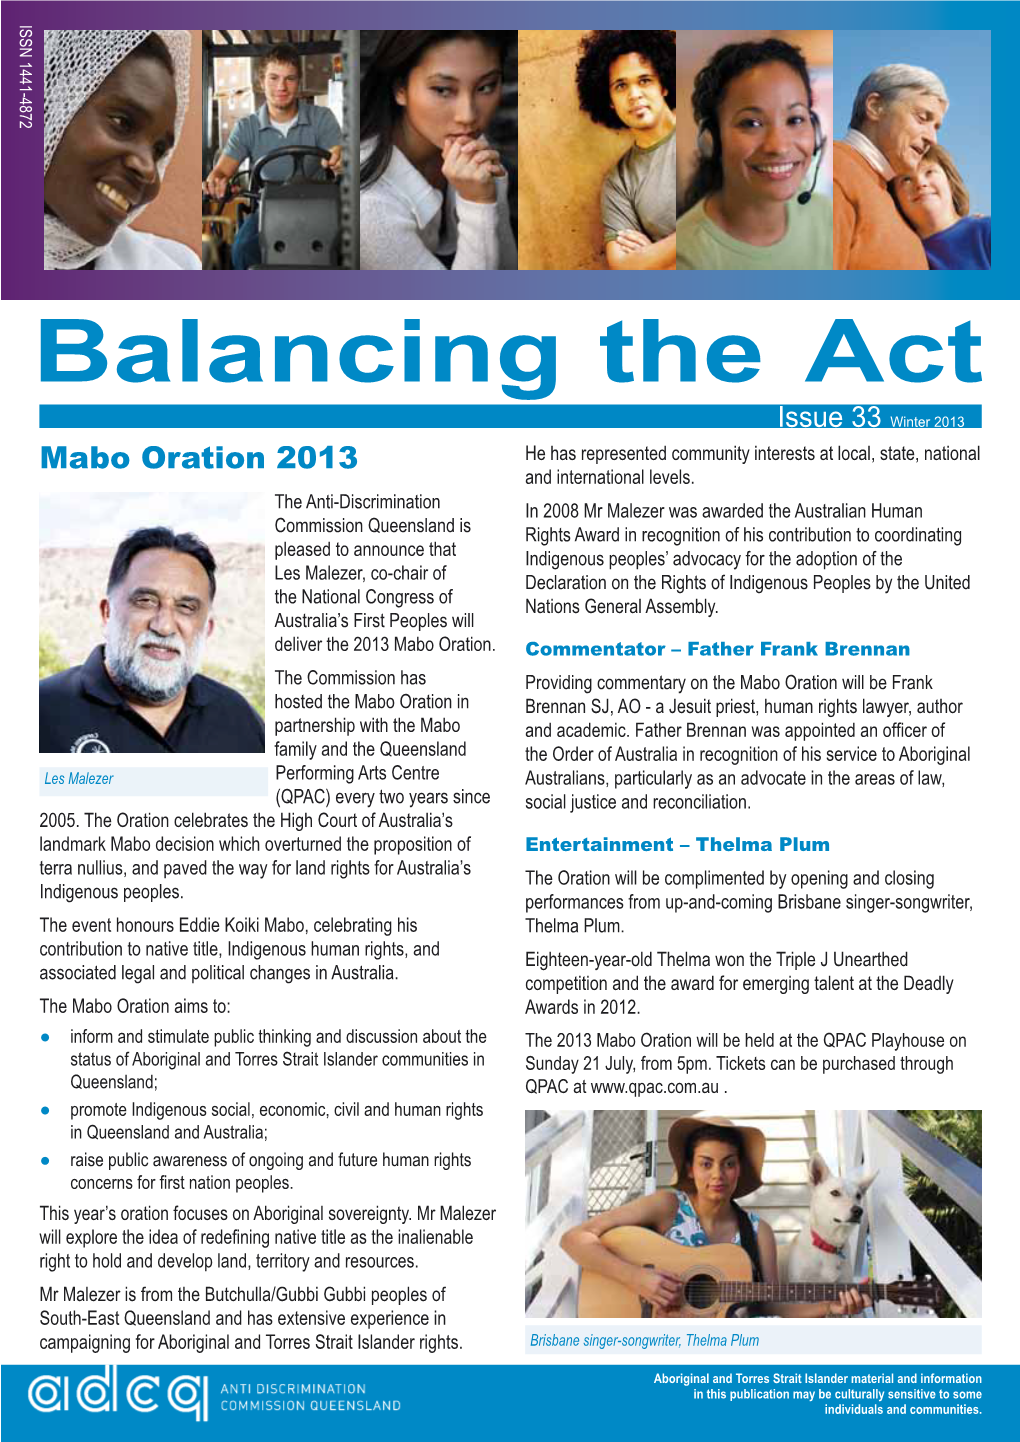 Balancing the Act Issue 33 Winter 2013 Mabo Oration 2013 He Has Represented Community Interests at Local, State, National and International Levels